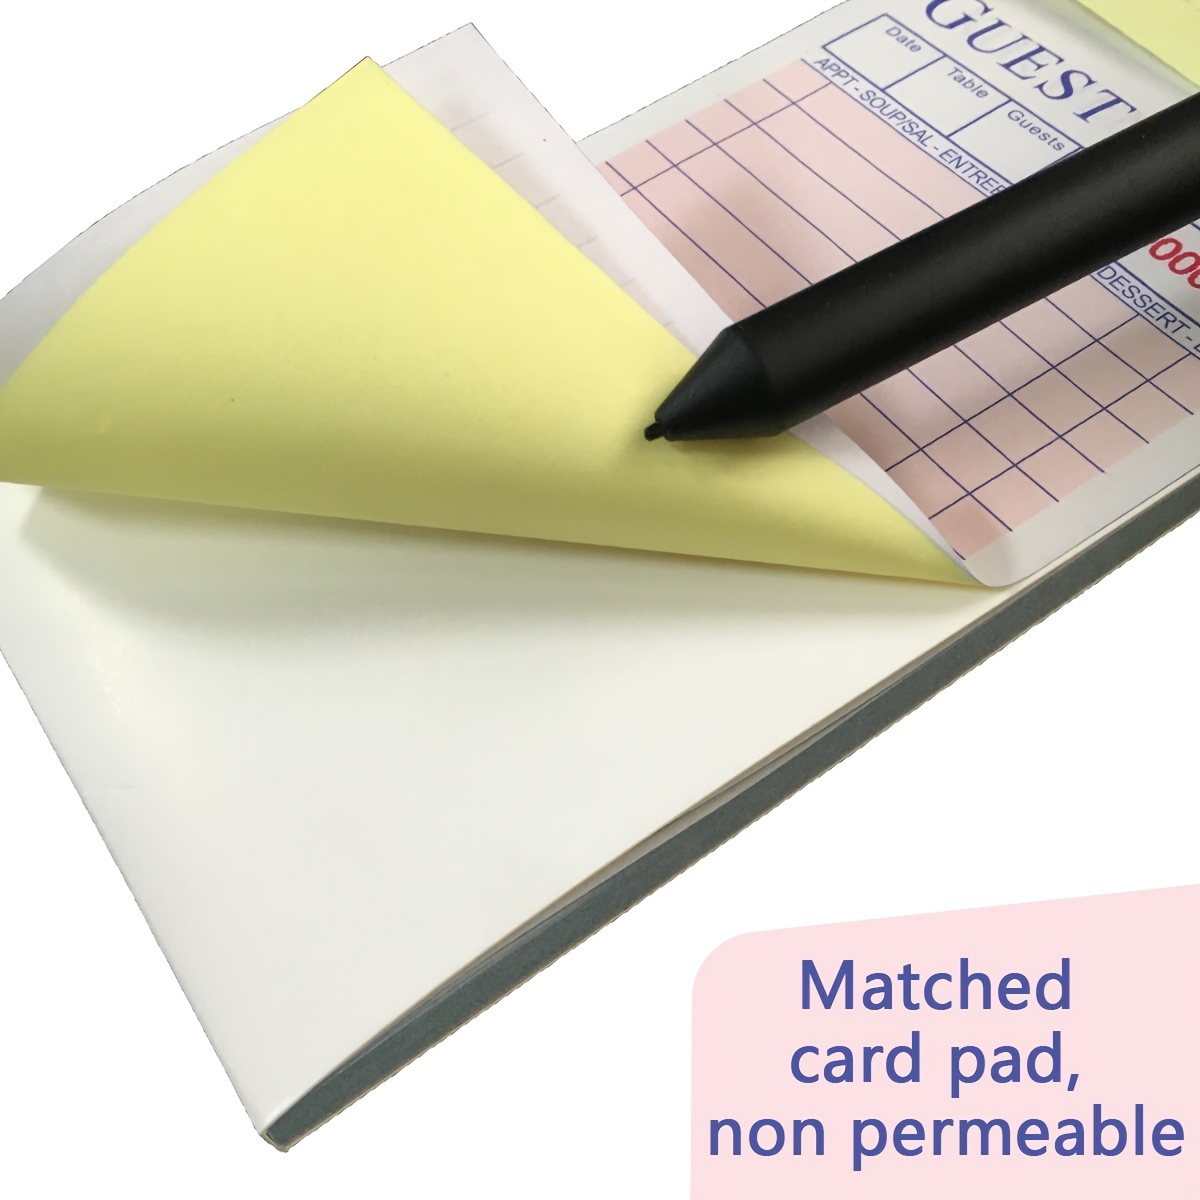 Carbonless Notebook Paper, Discontinued Products